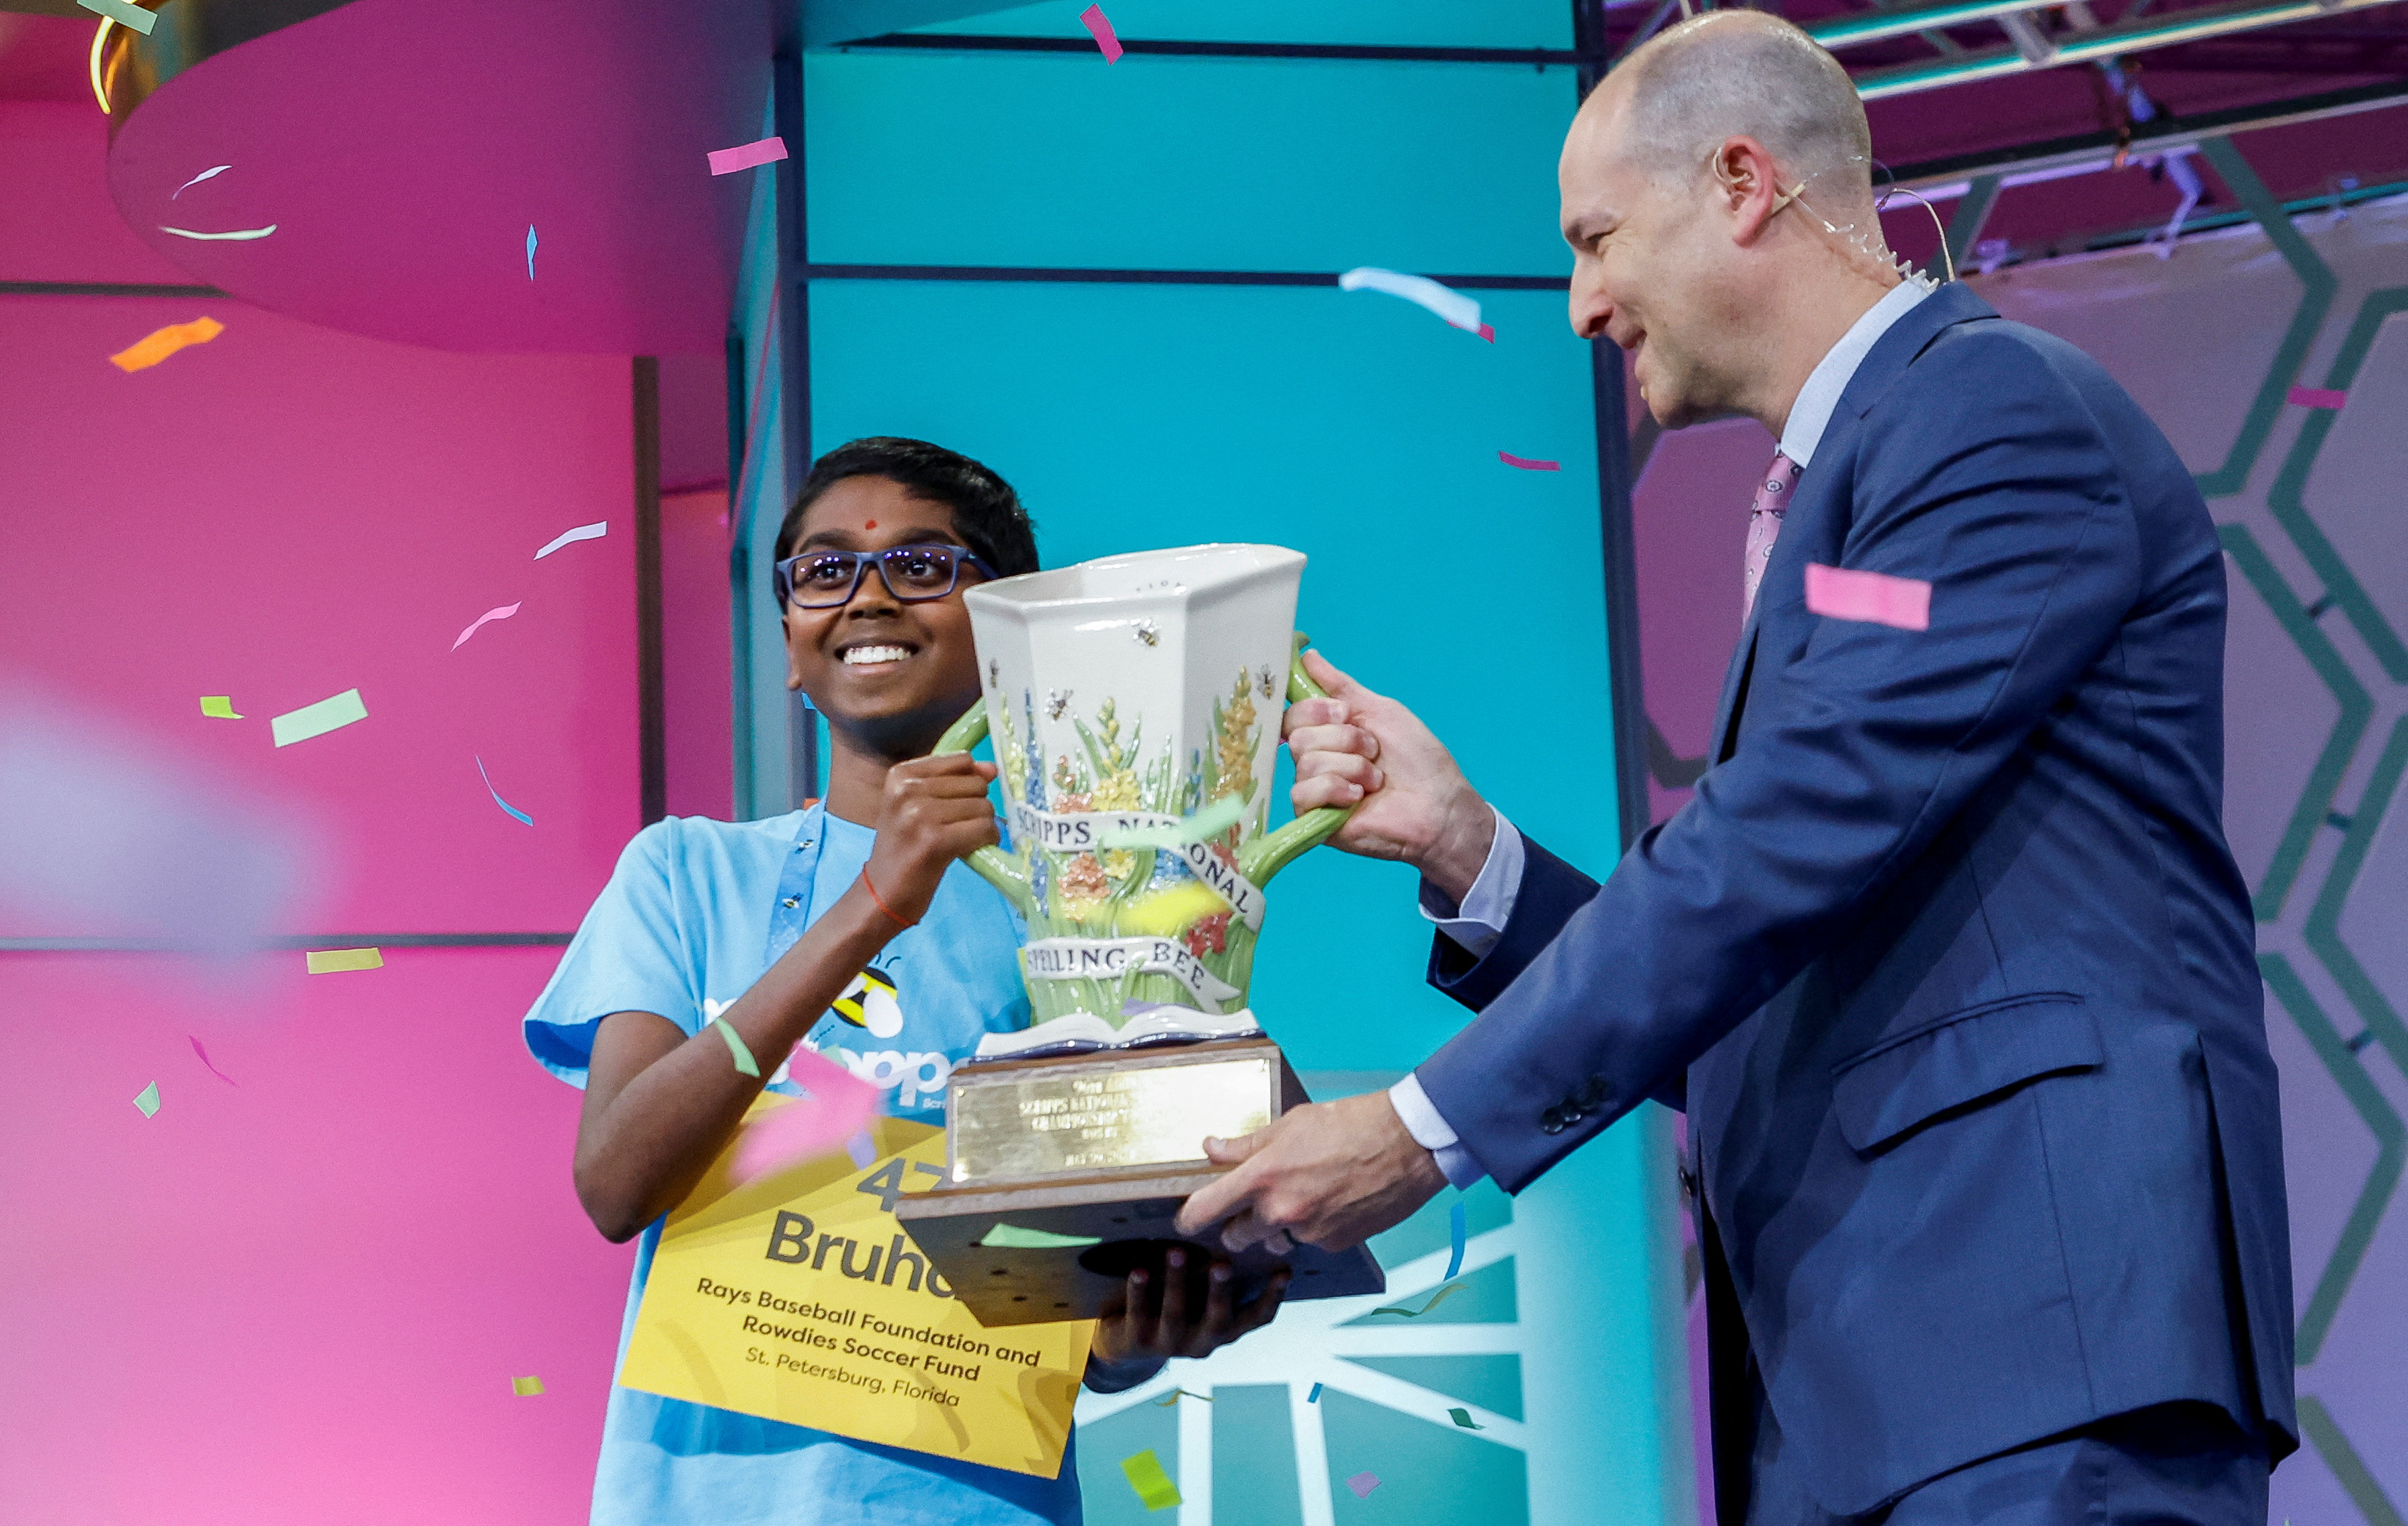 Student spellers compete in the finals of the Scripps National Spelling Bee in Maryland